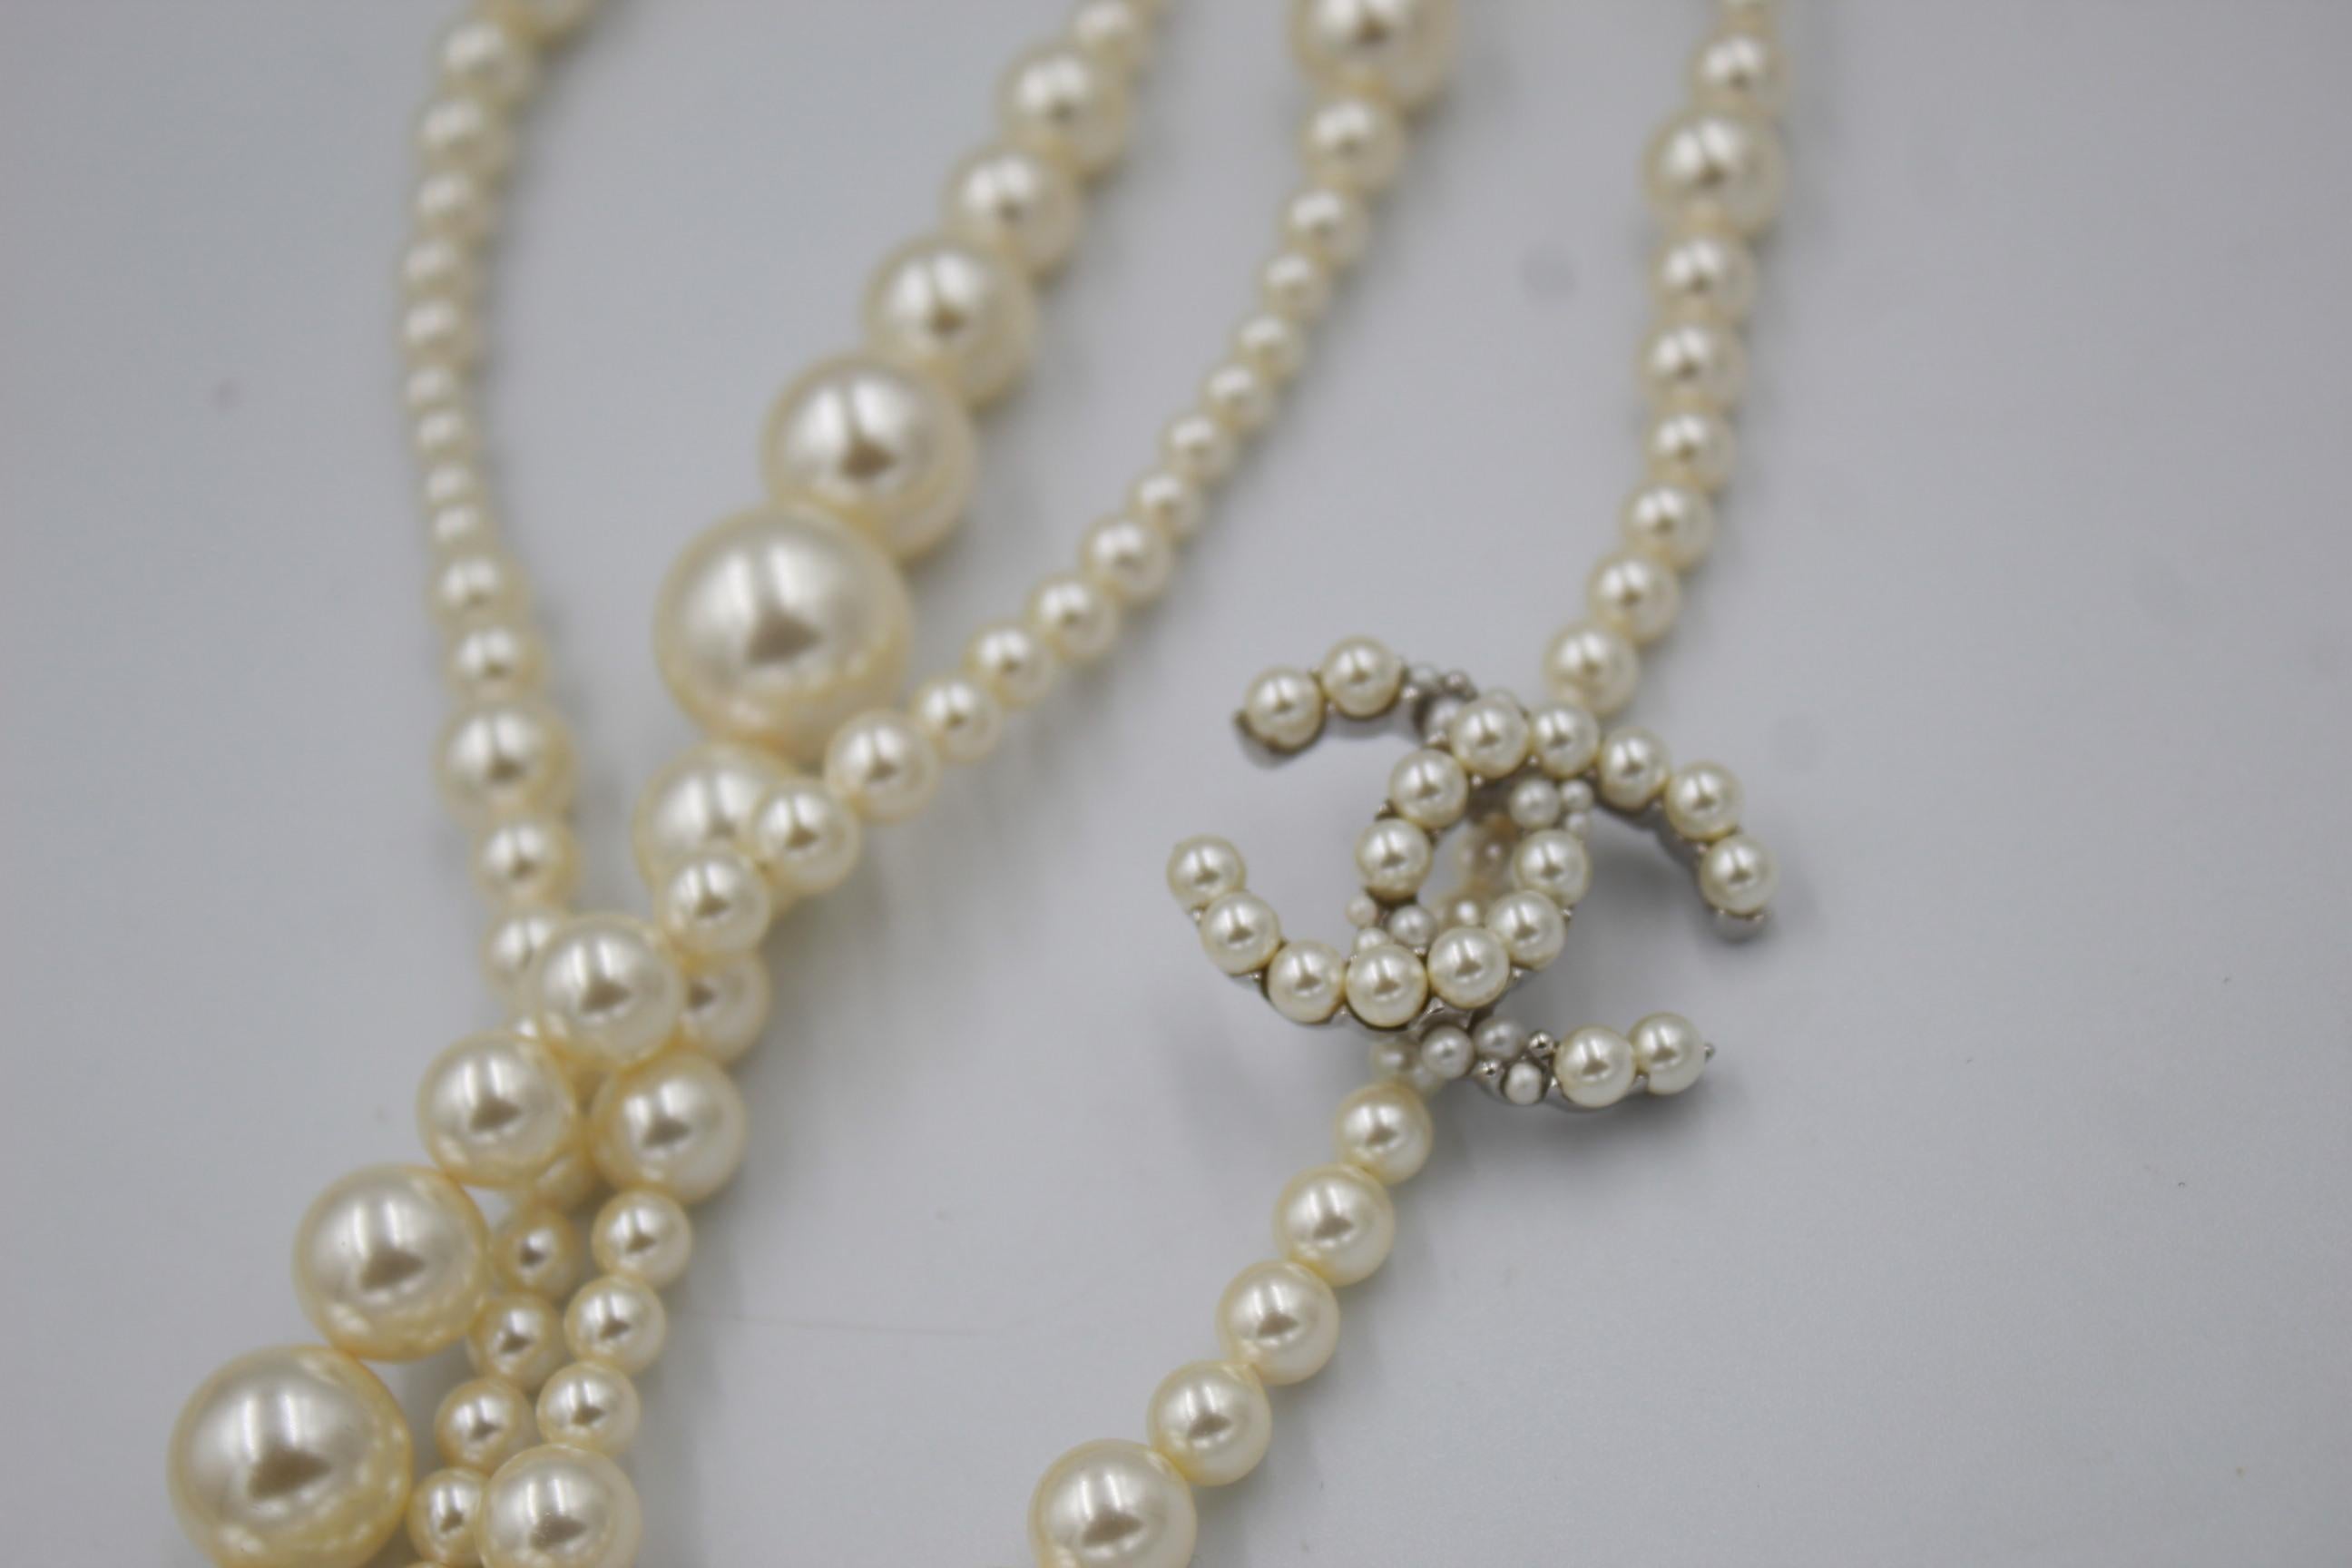 Chanel 4 rangs fake pearls necklace - 2014
New in box
